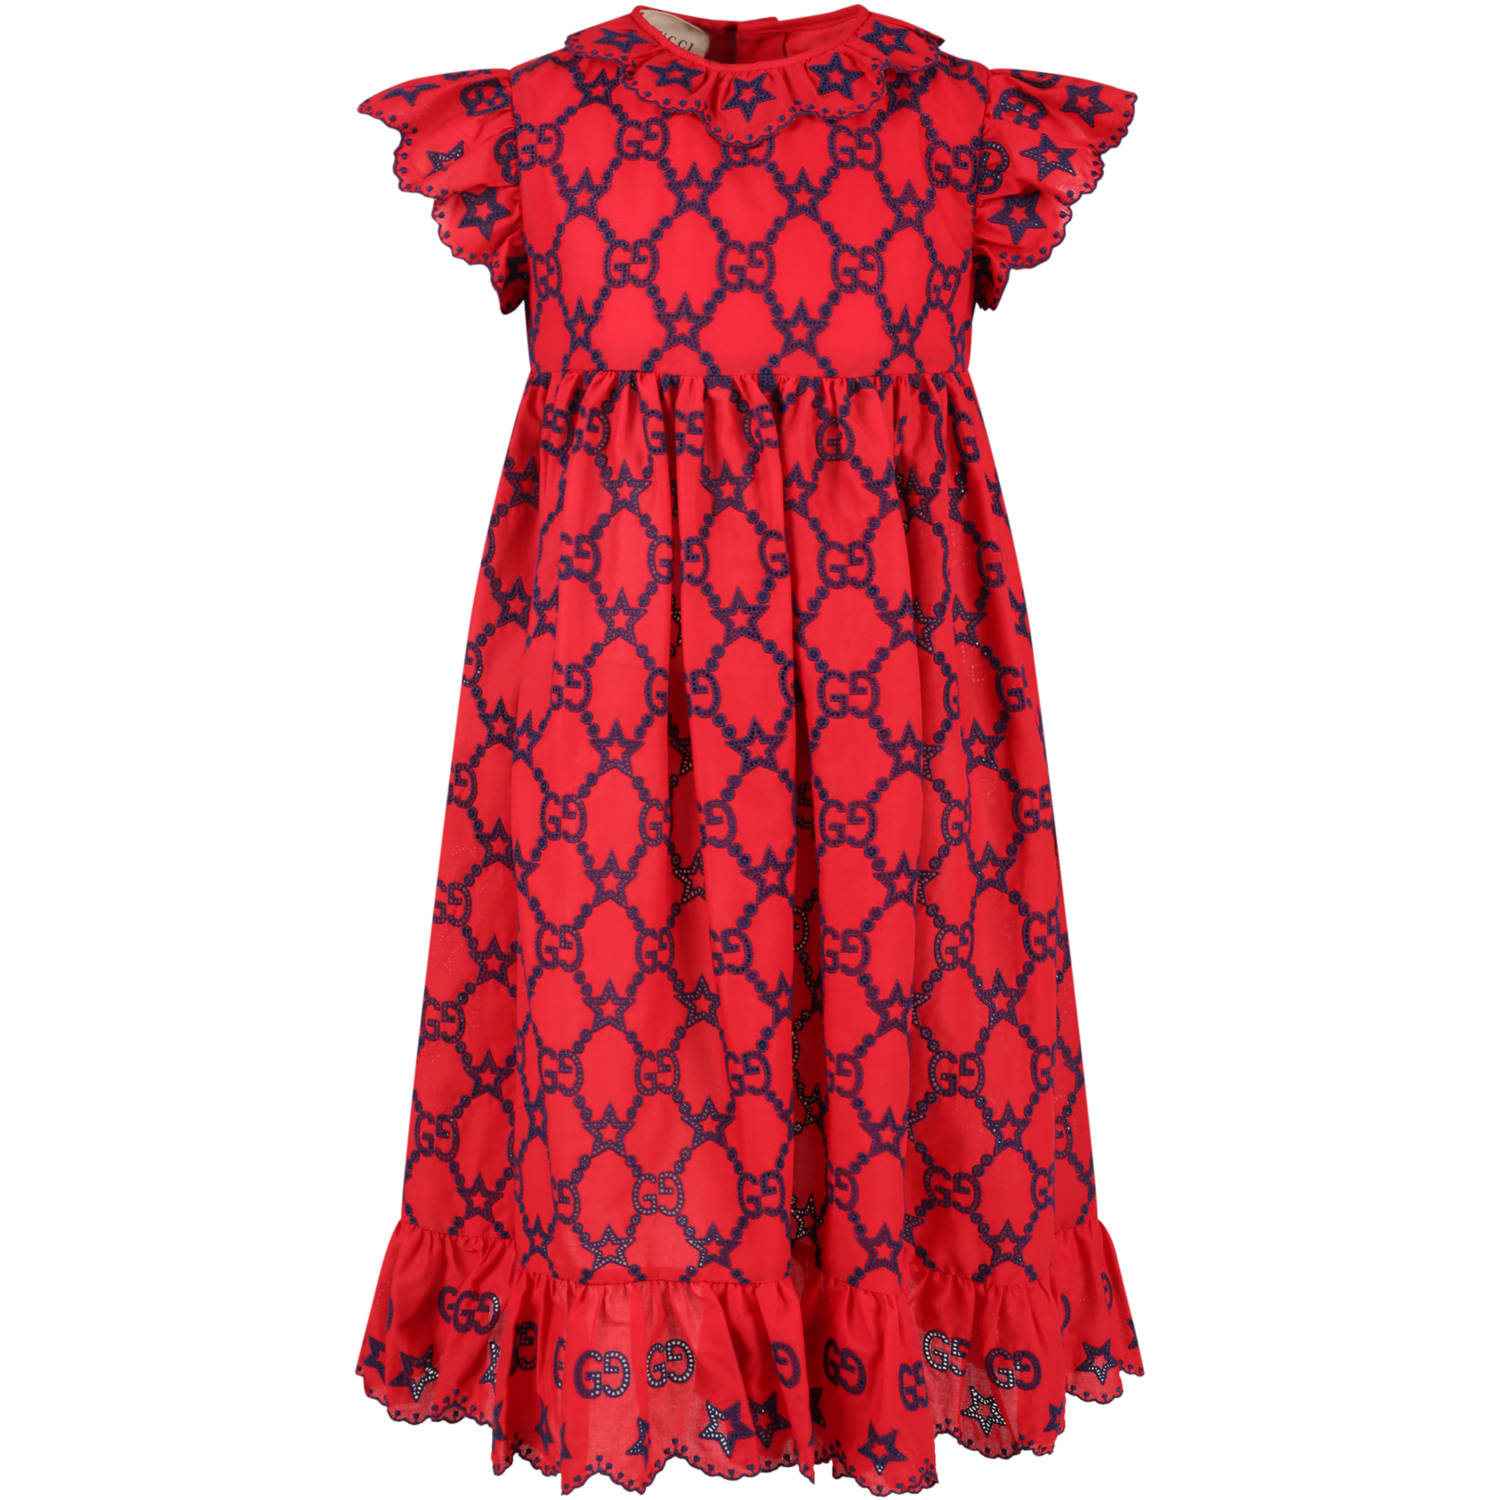 Gucci Red Dress For Girl With Stars